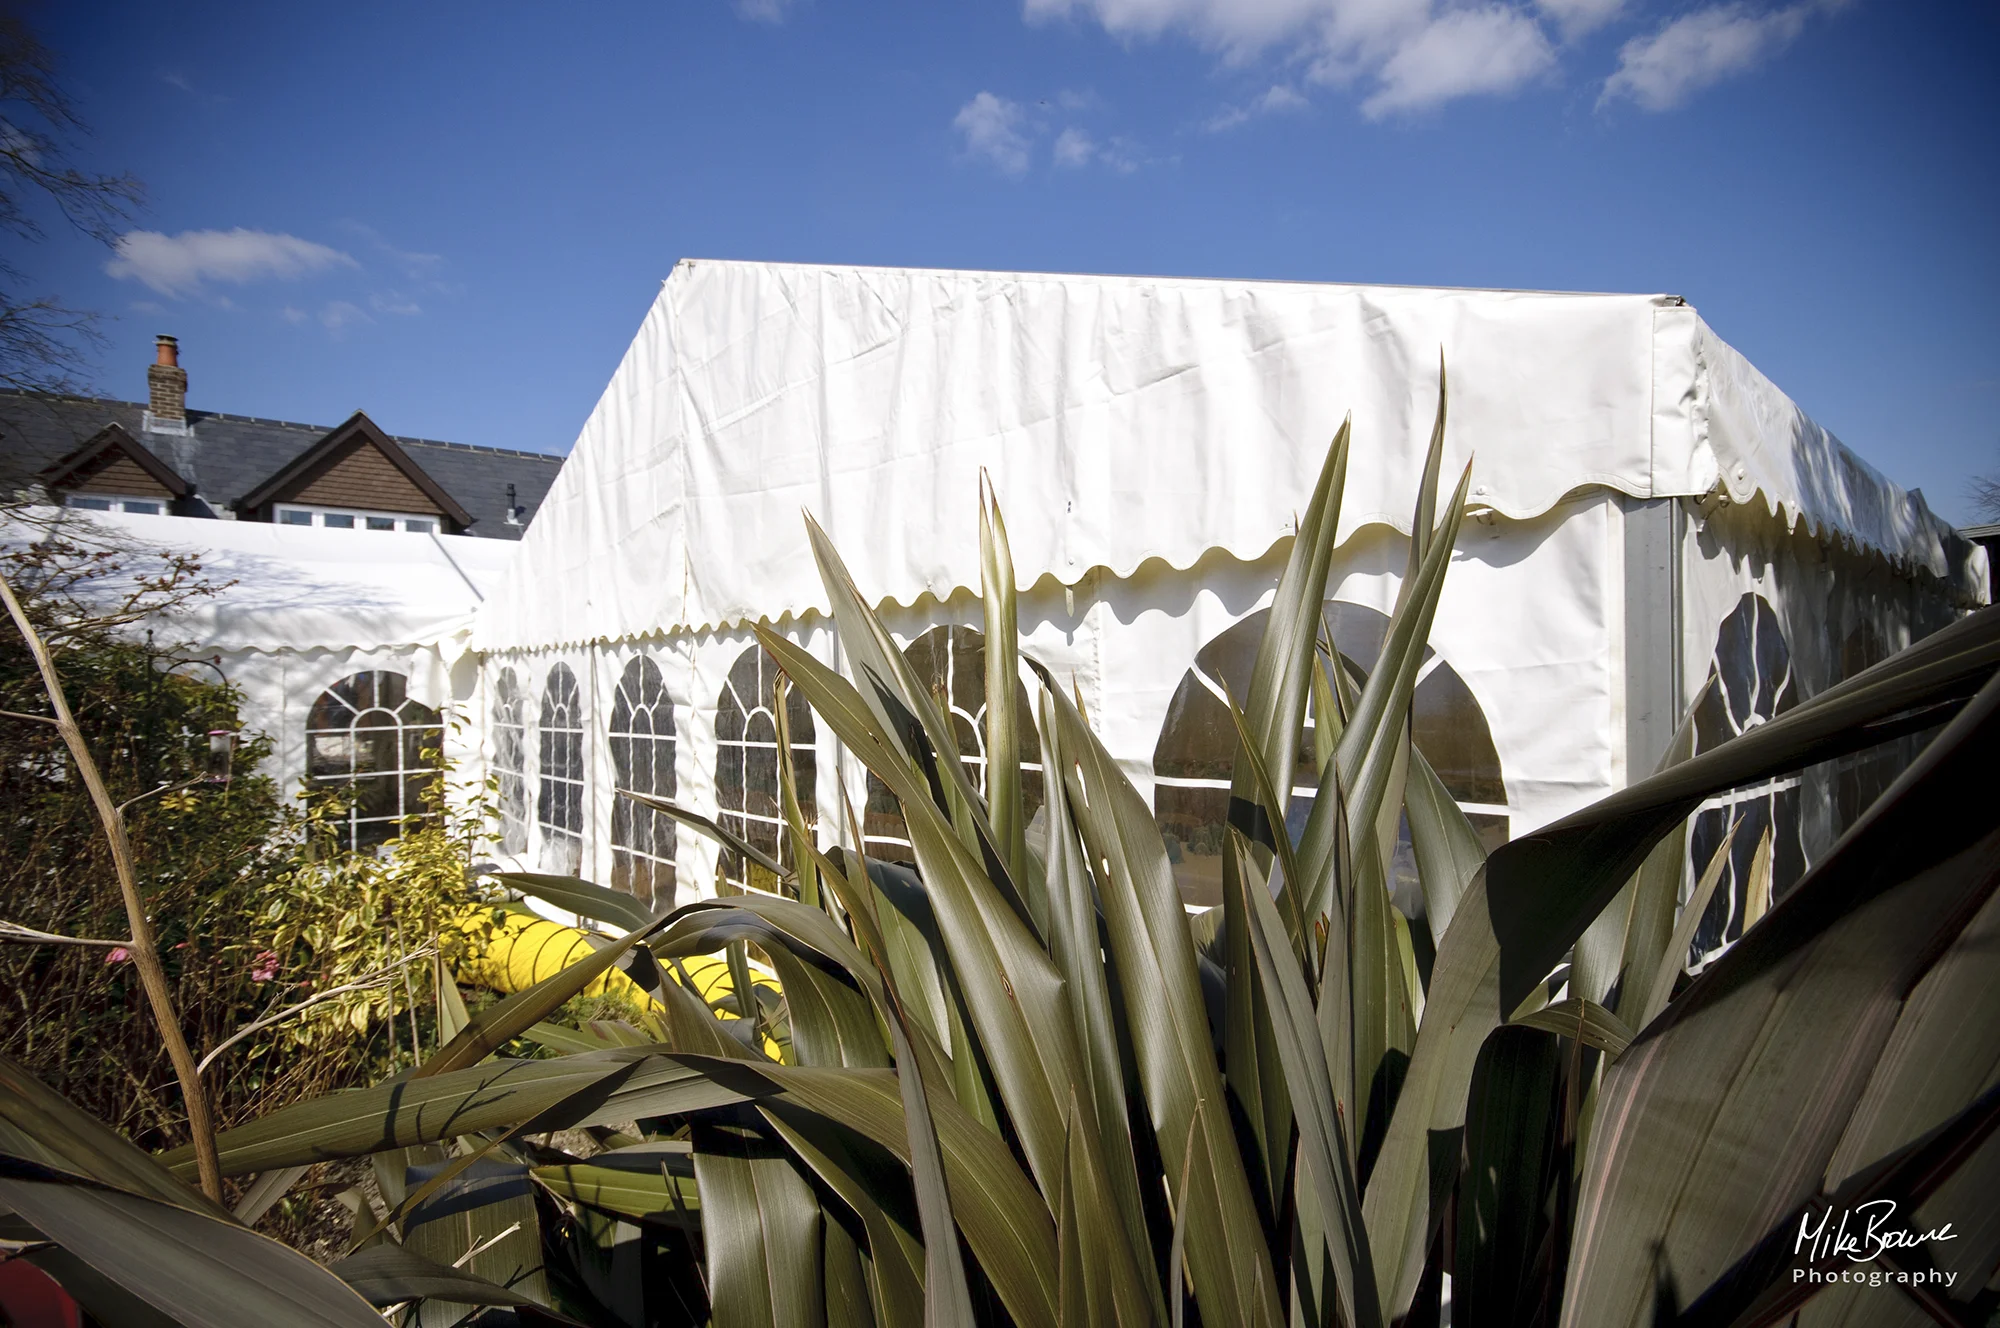 Plants in front of a stylish white marquee under a blue sky